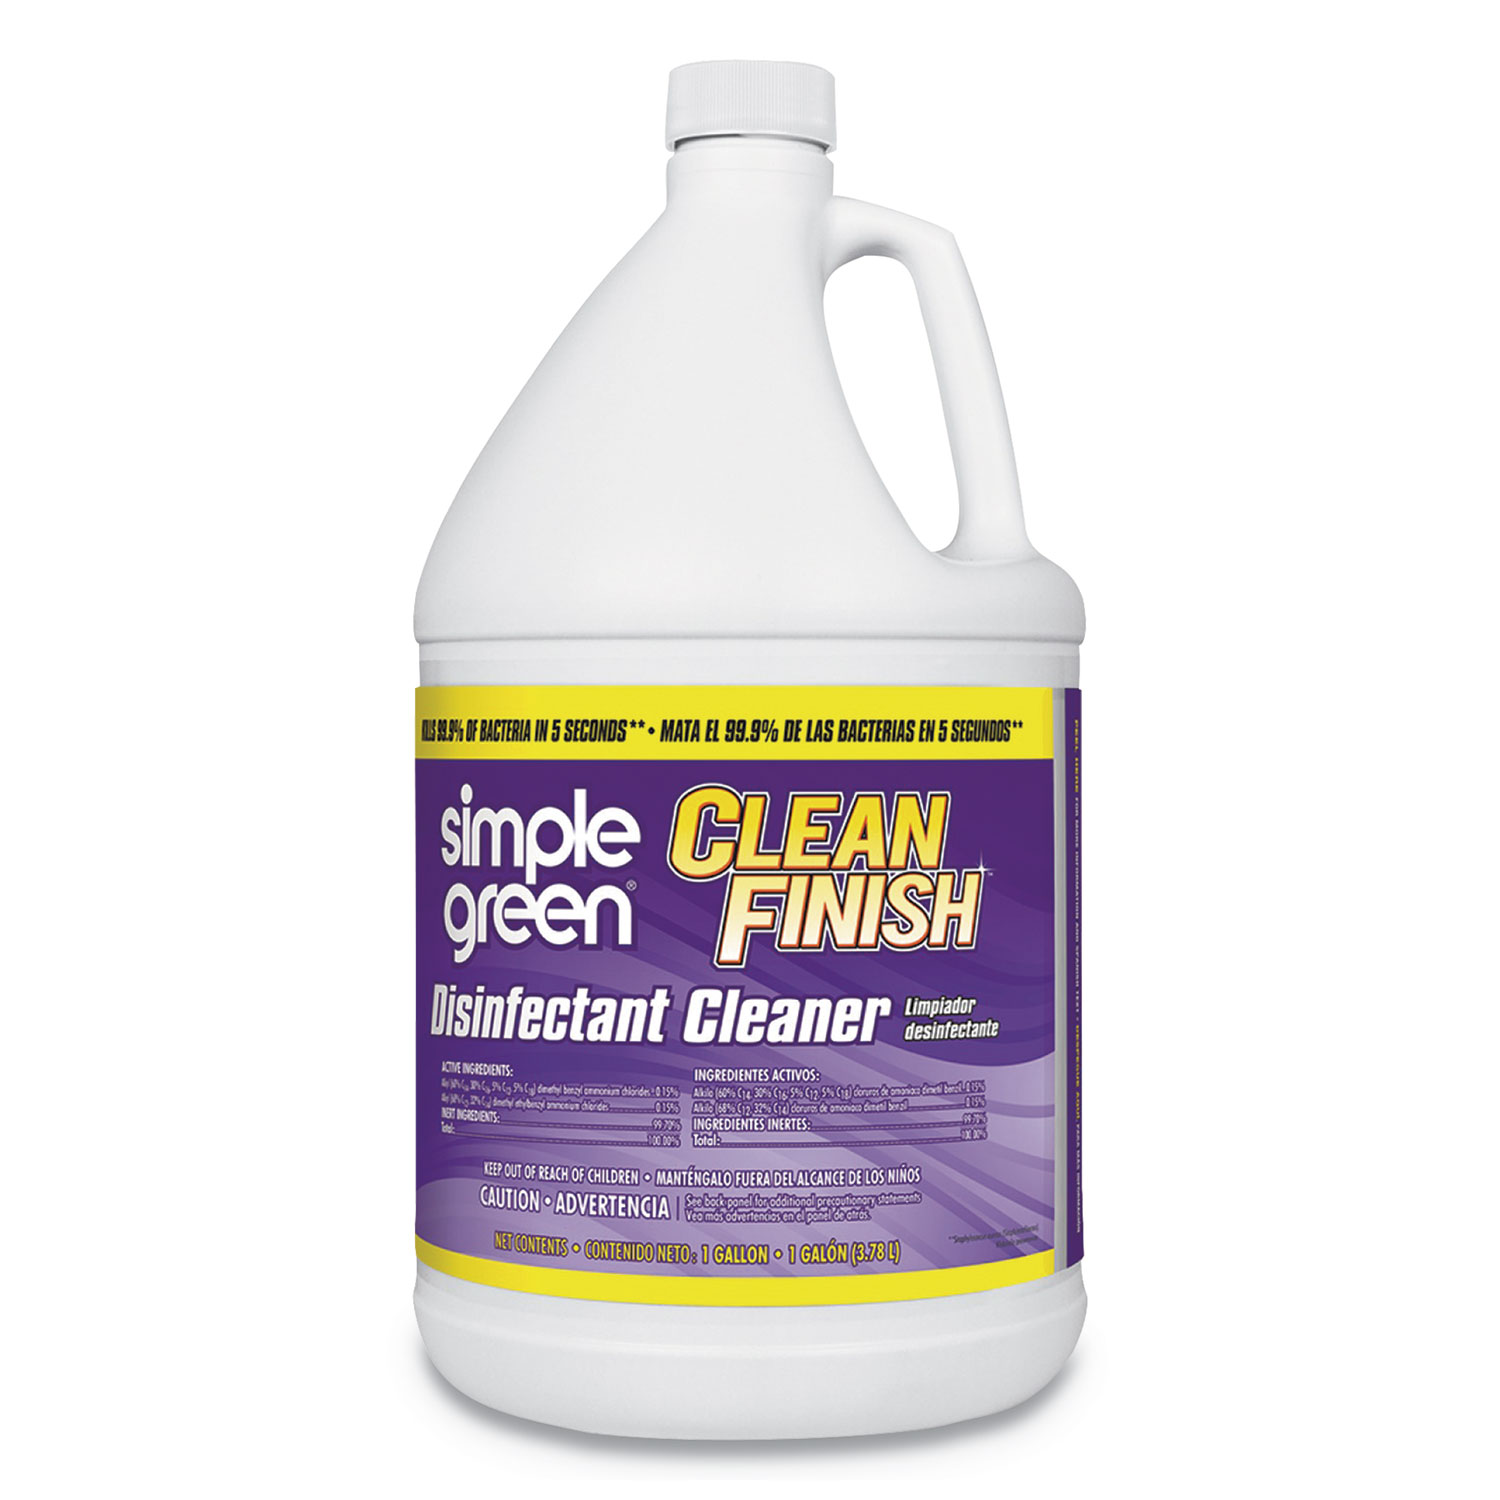 Clean Finish Disinfectant Cleaner, 1 gal Bottle, Herbal